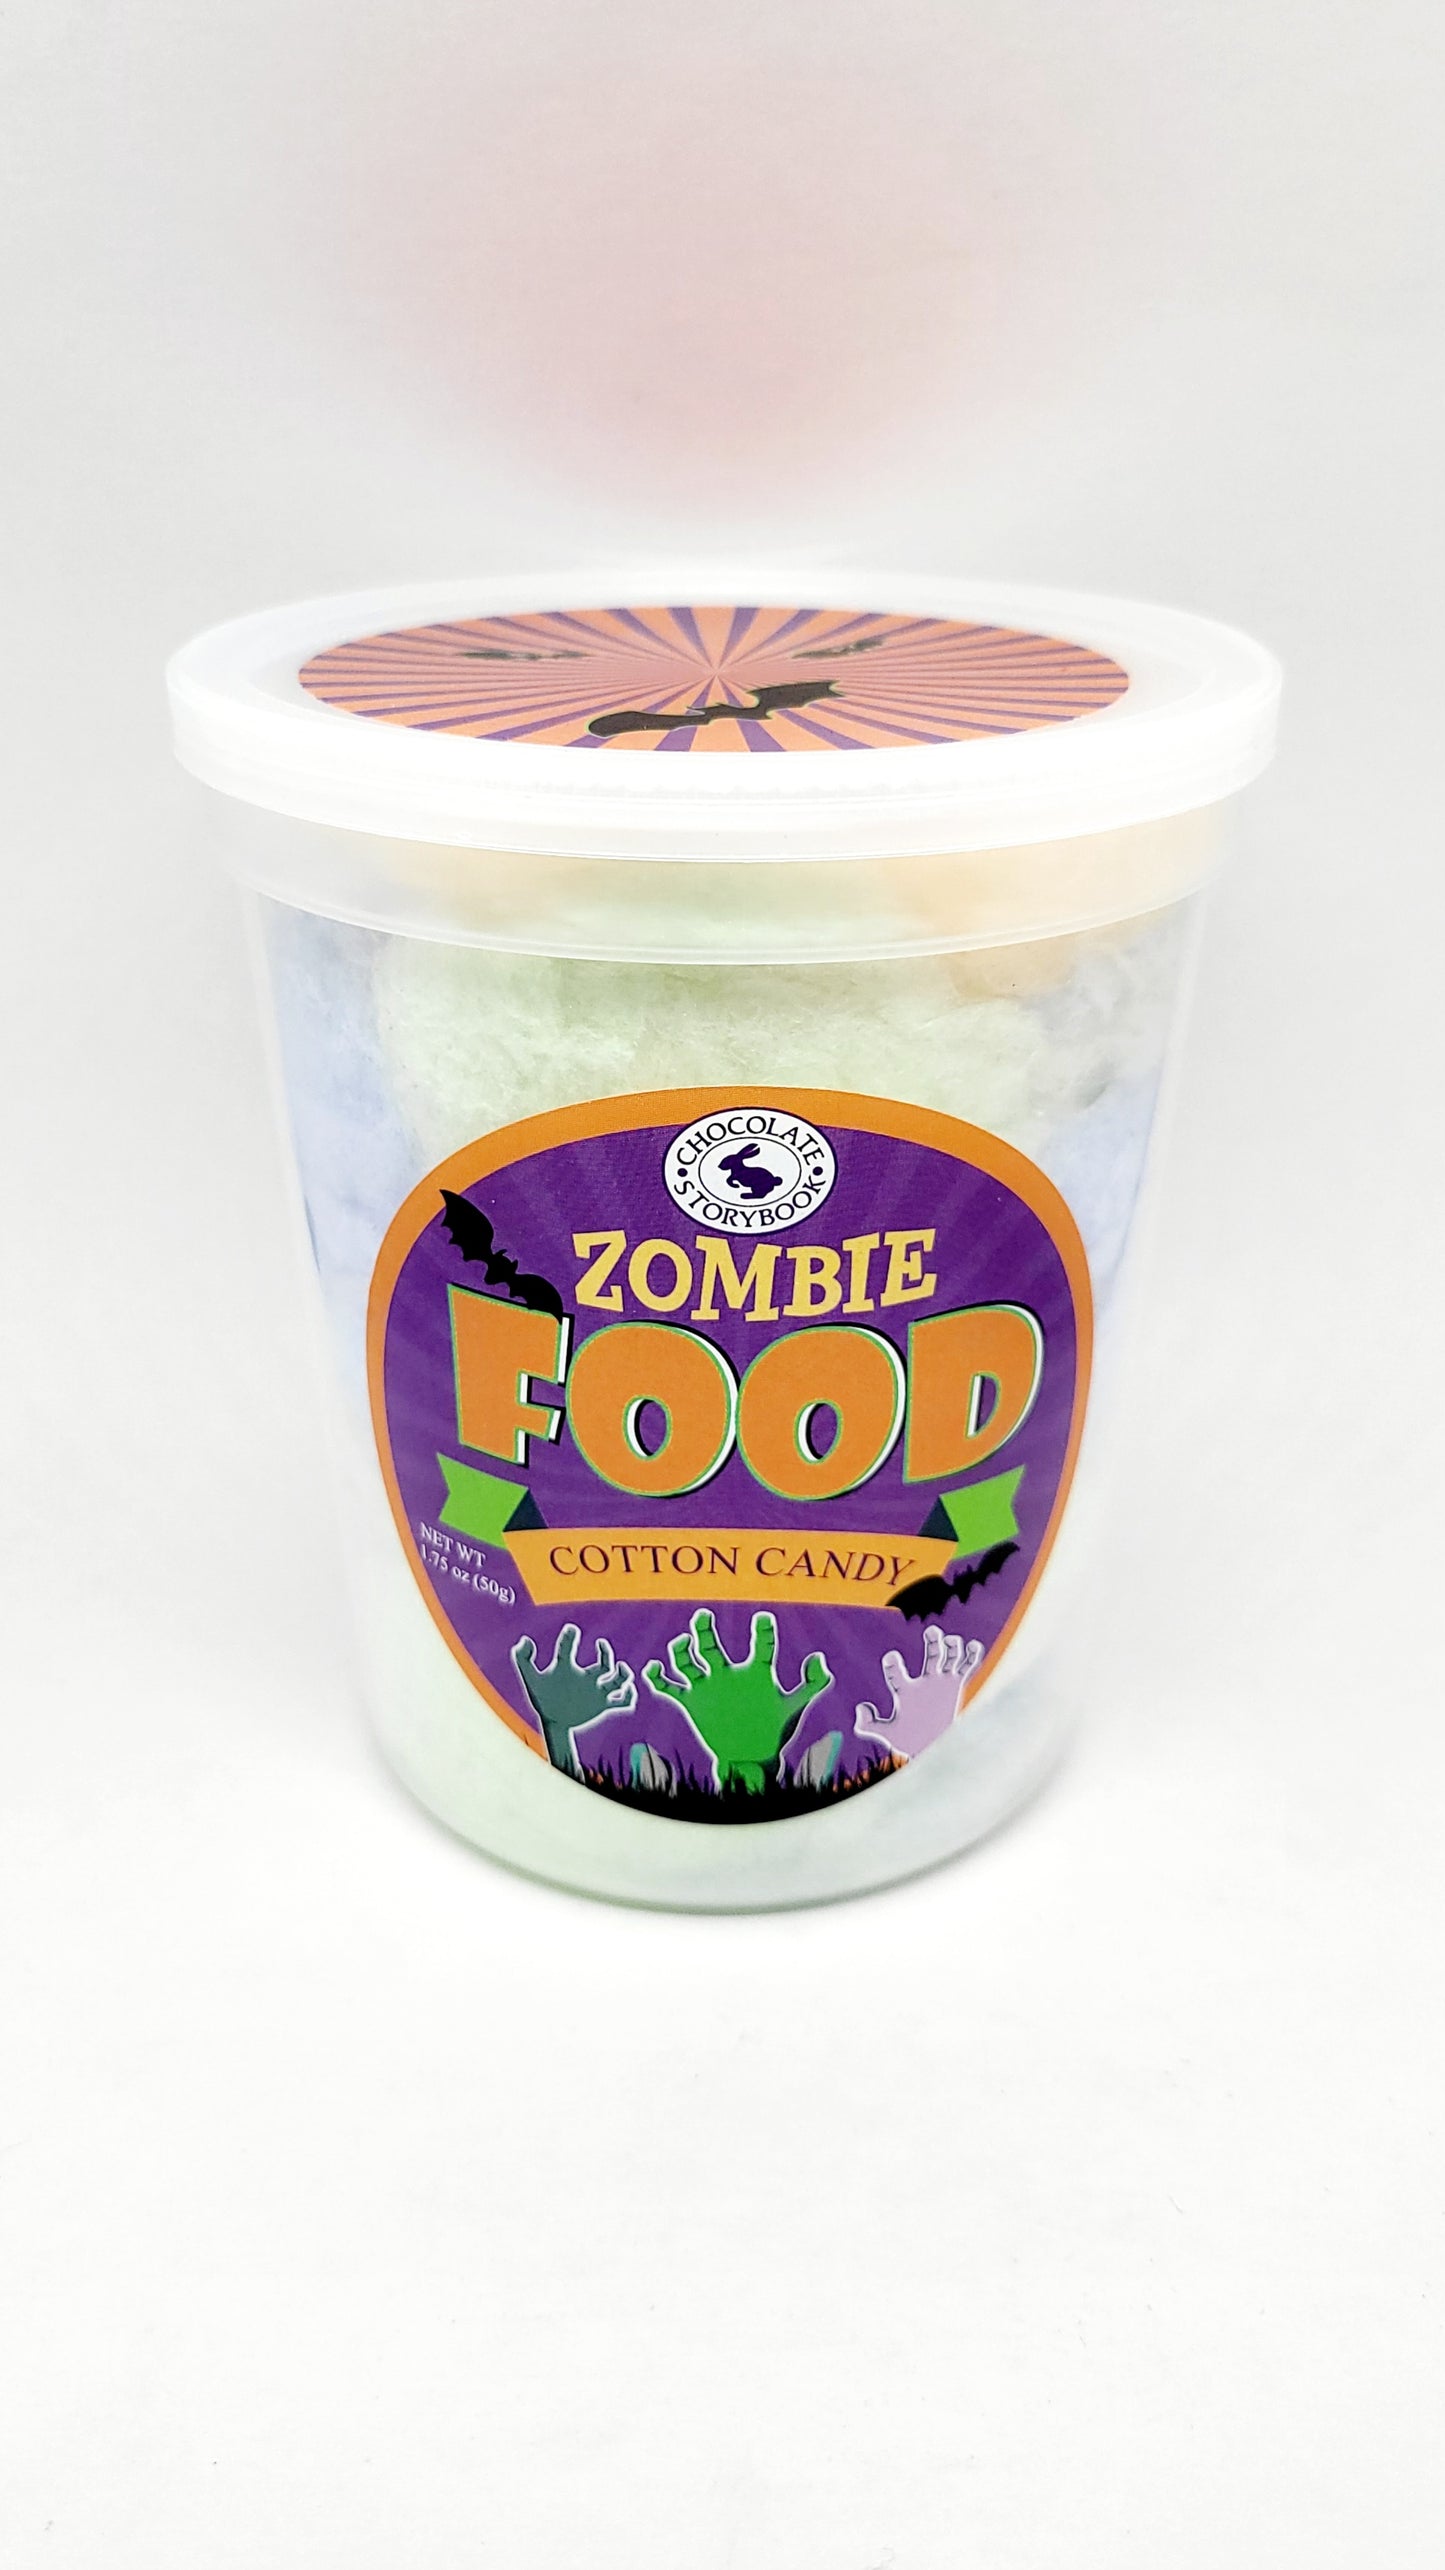 Zombie Food Cotton Candy 1.75 oz